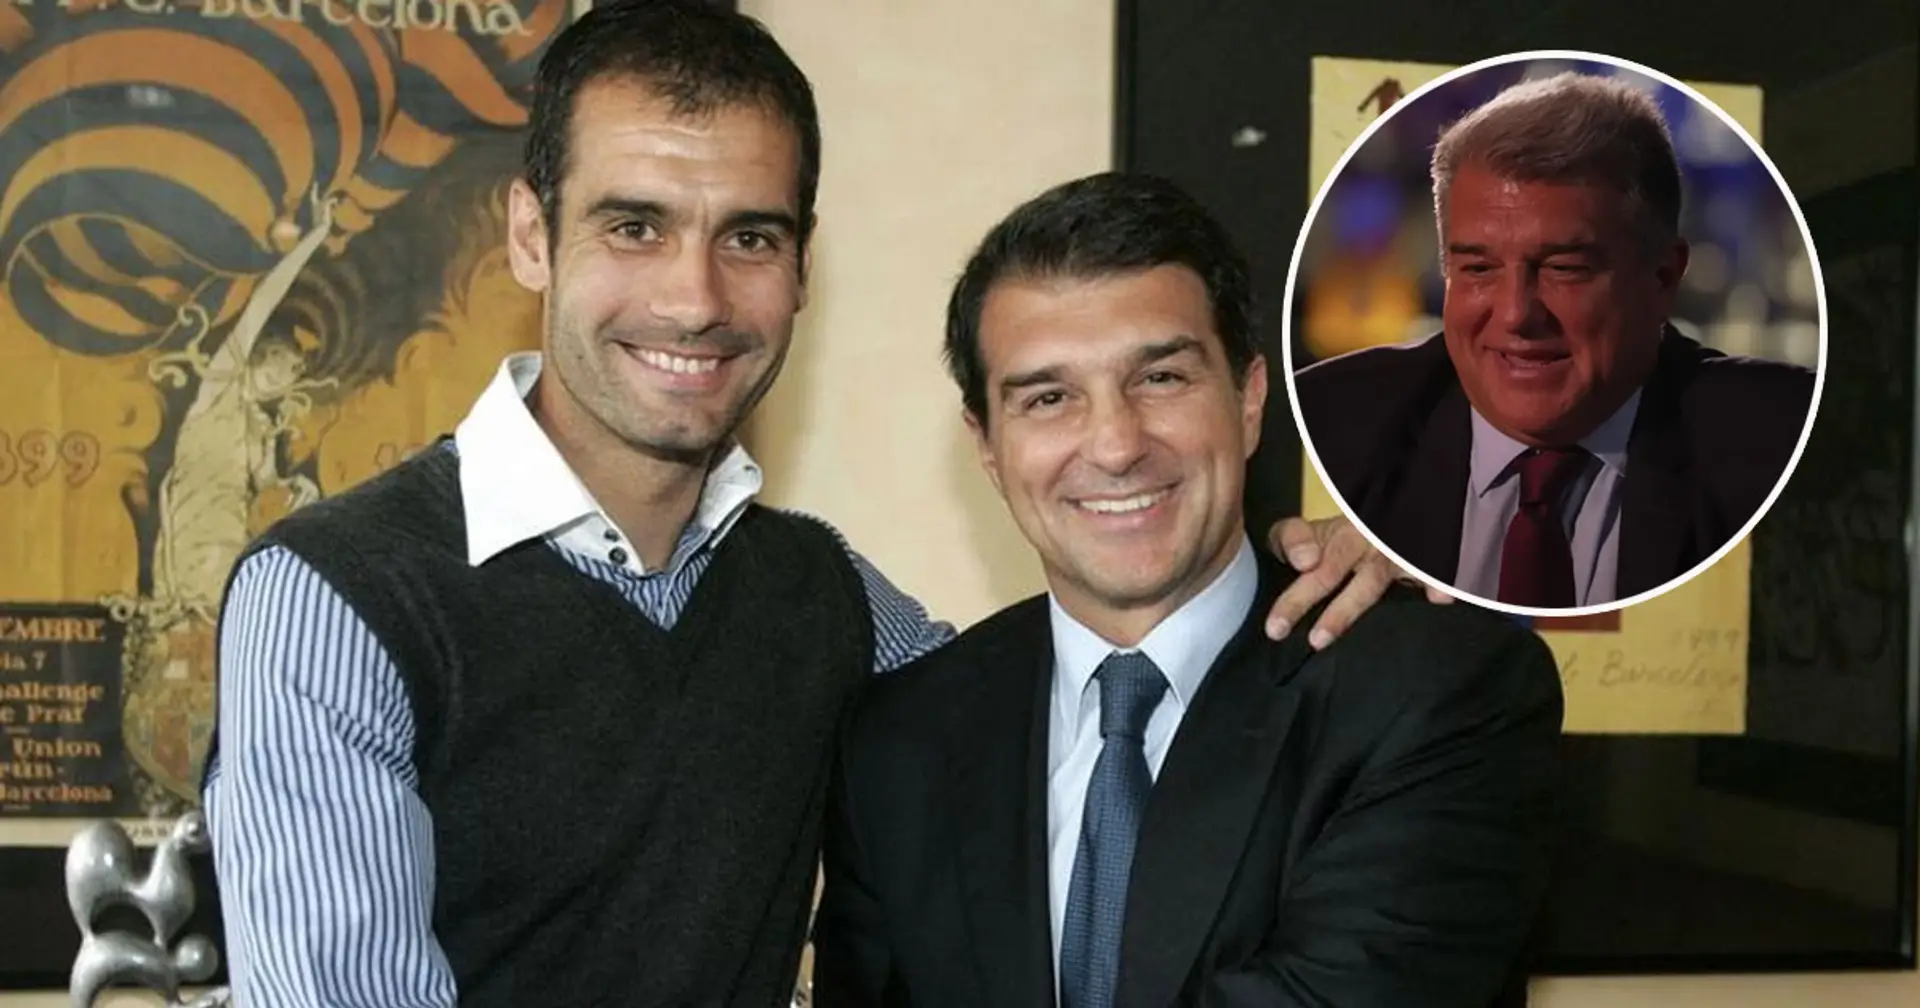 'You haven't got the b***s': How Laporta offered Pep Guardiola Barca manager job